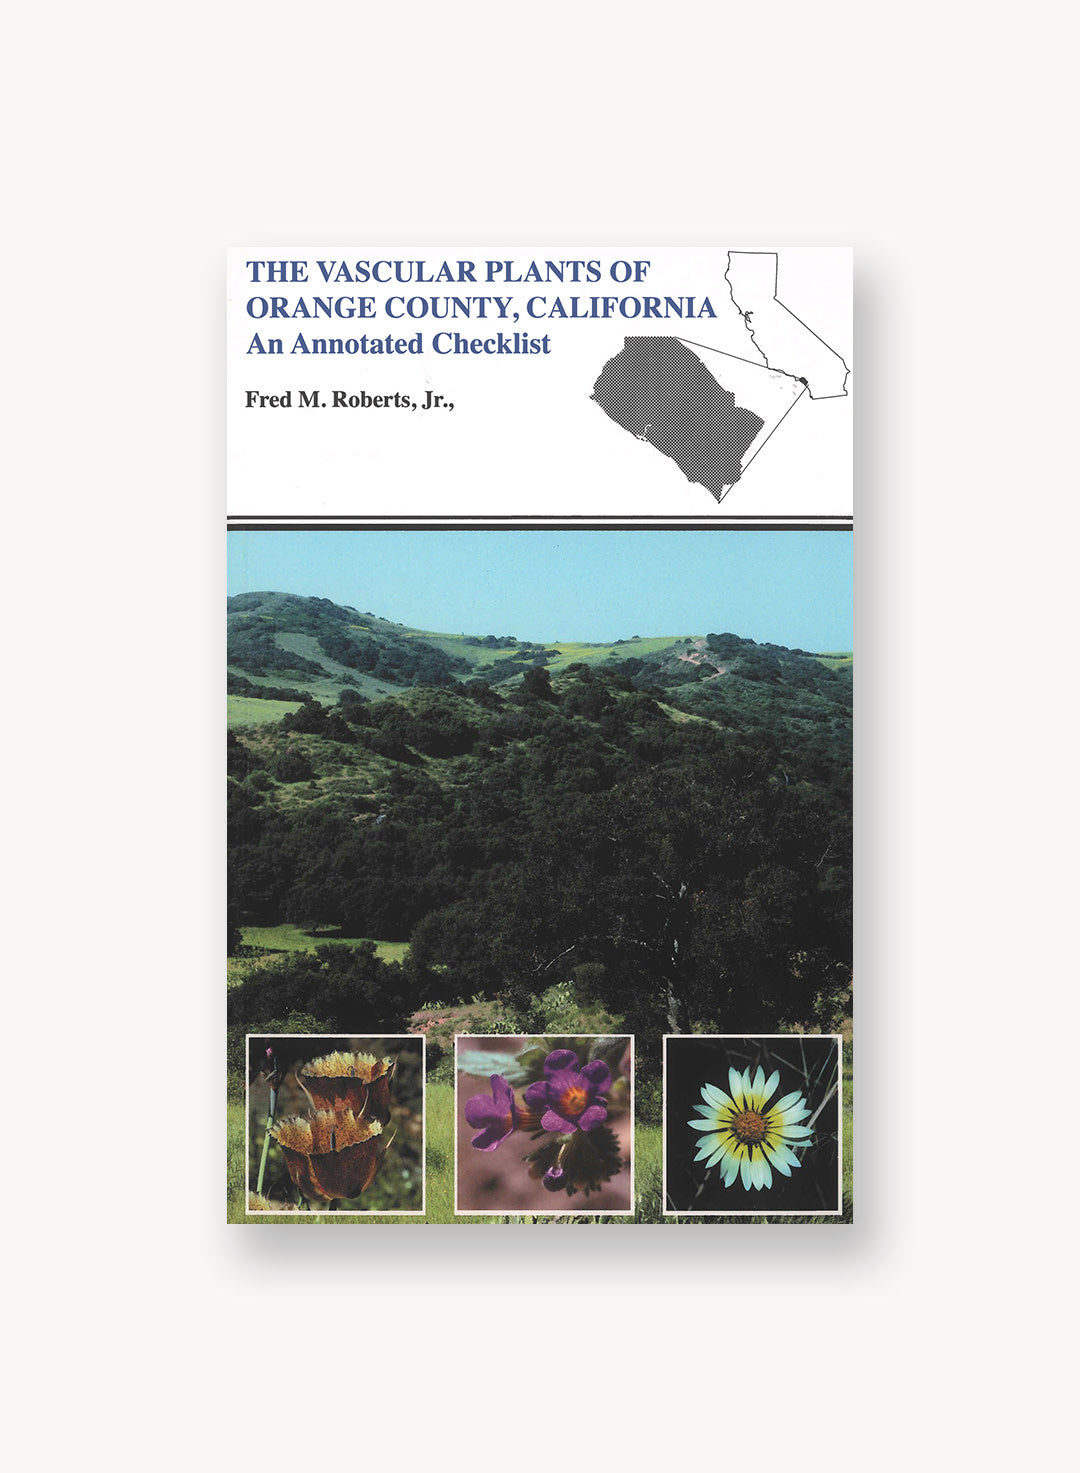 The Vascular Plants of Orange County, California: An Annotated Checklist